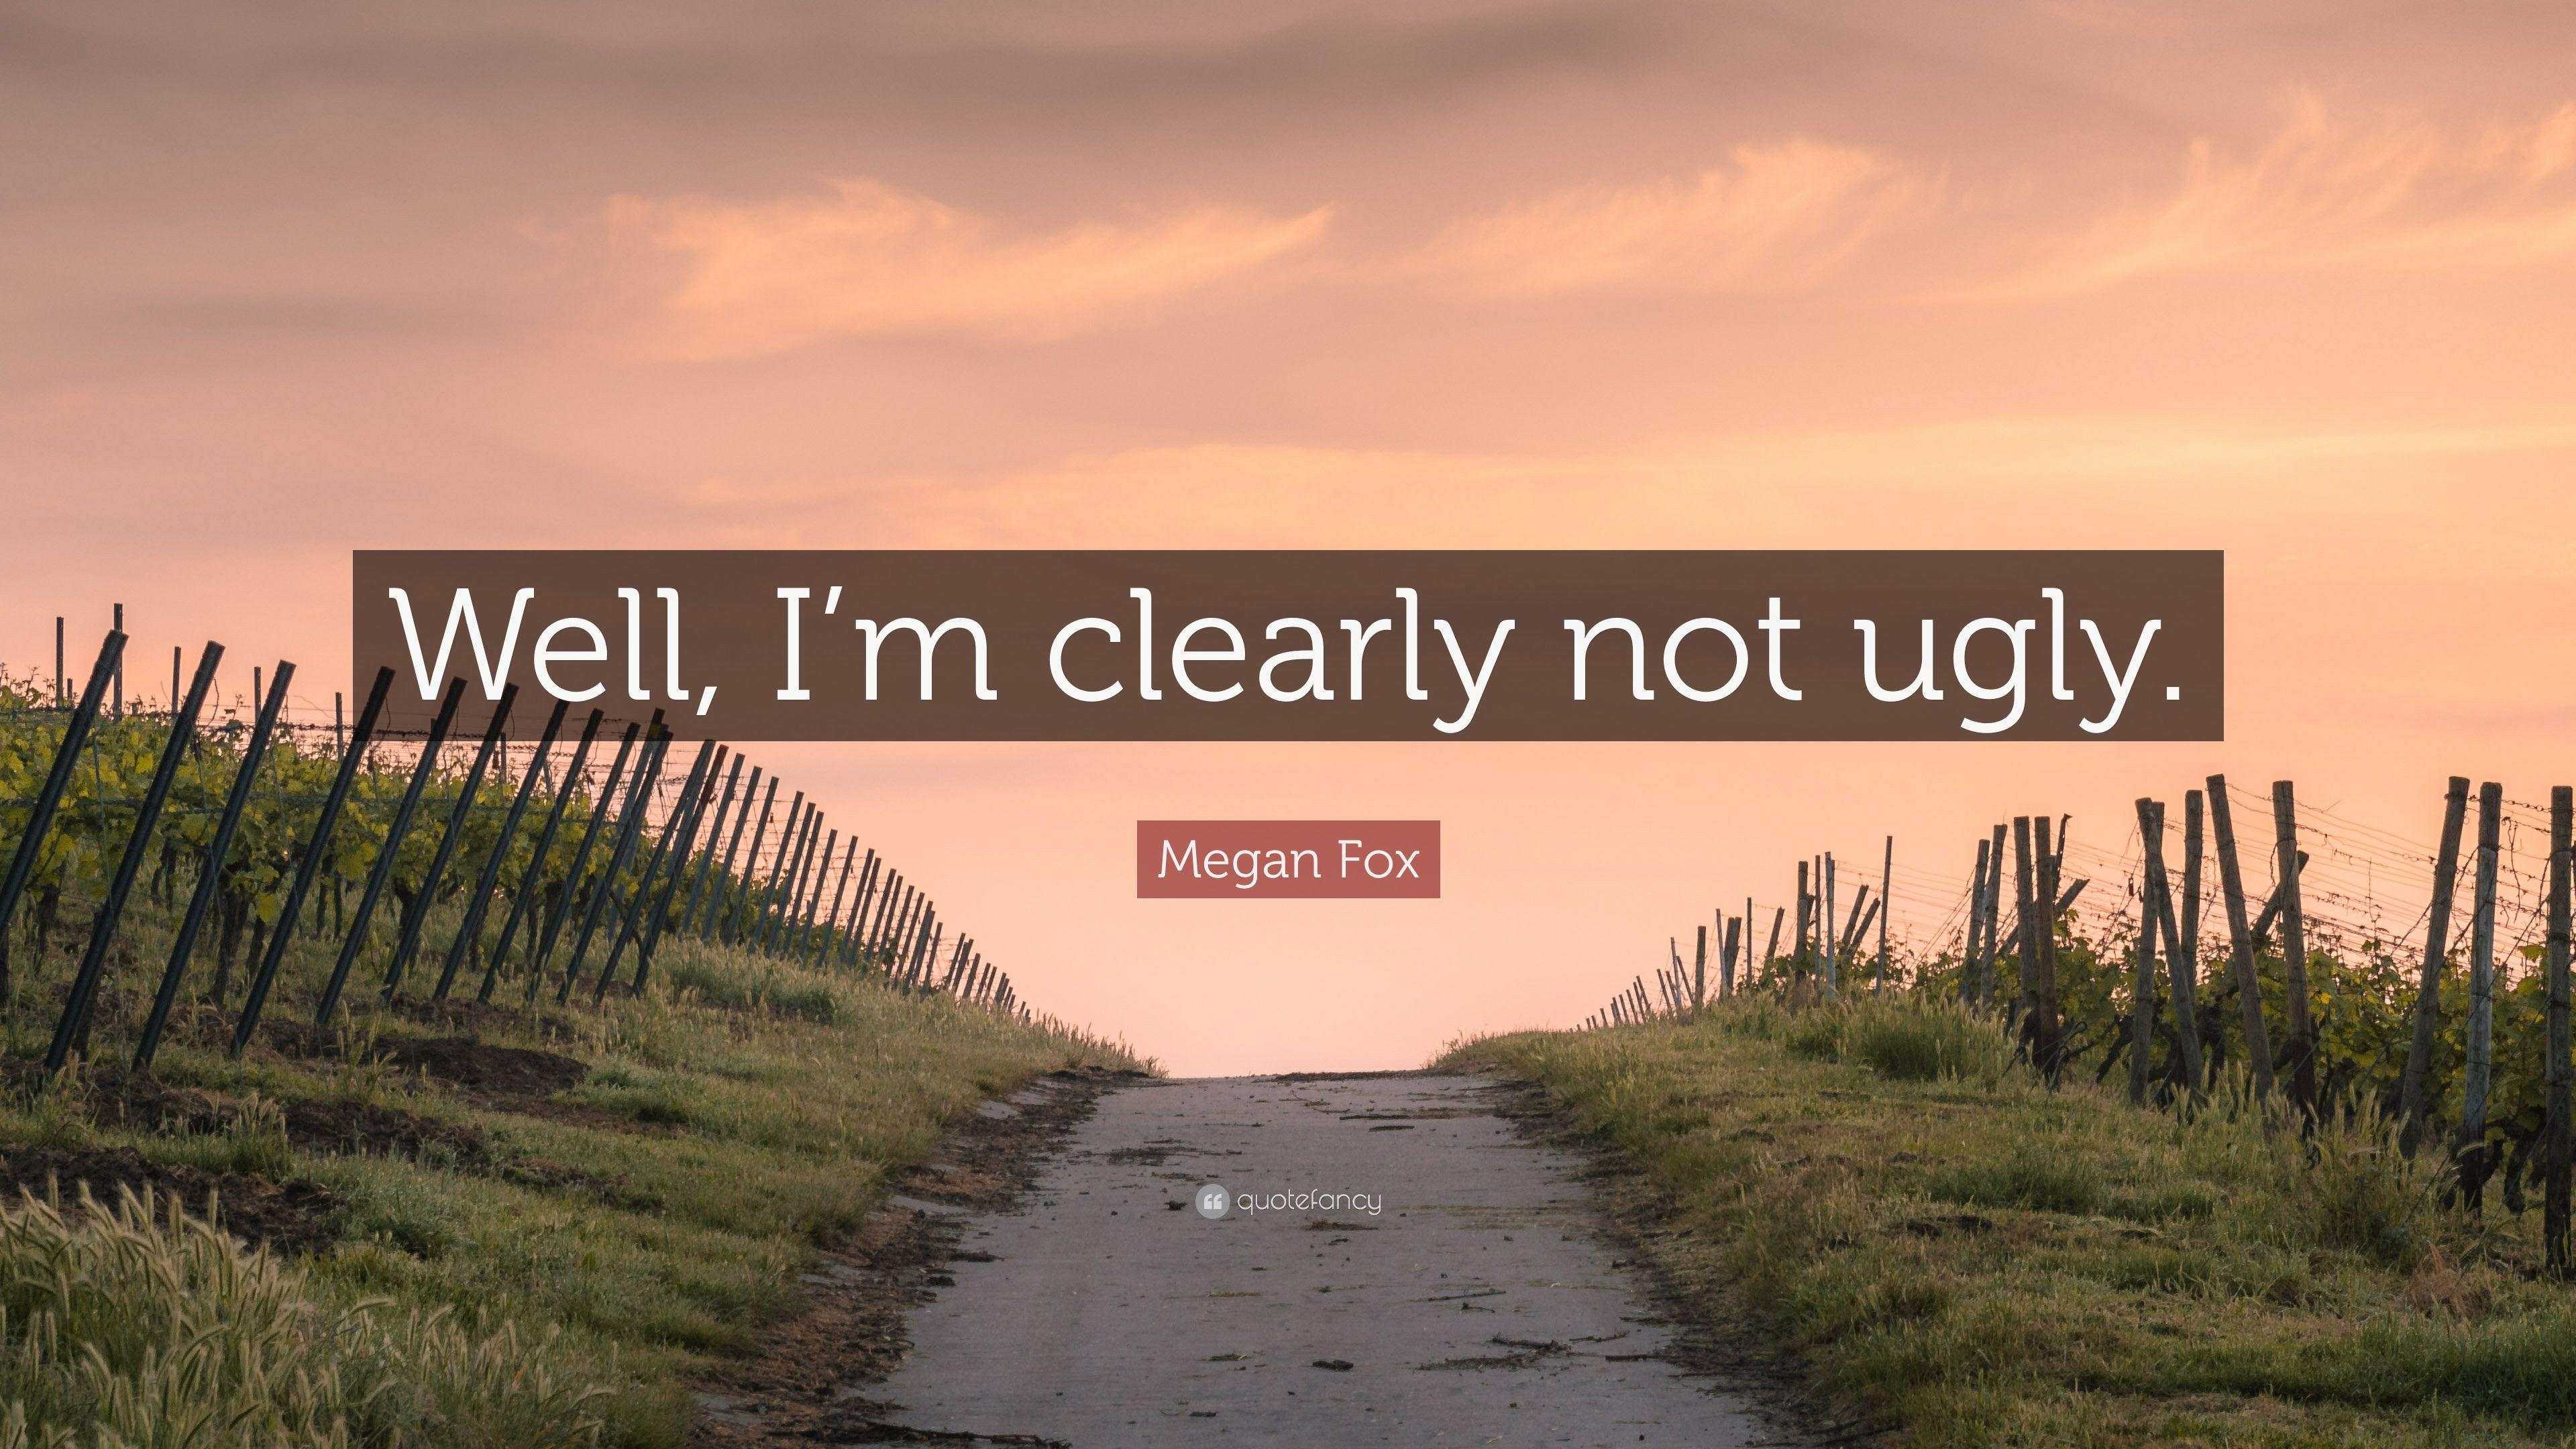 Megan Fox Quote: “Well, I'm clearly not ugly.” 7 wallpaper